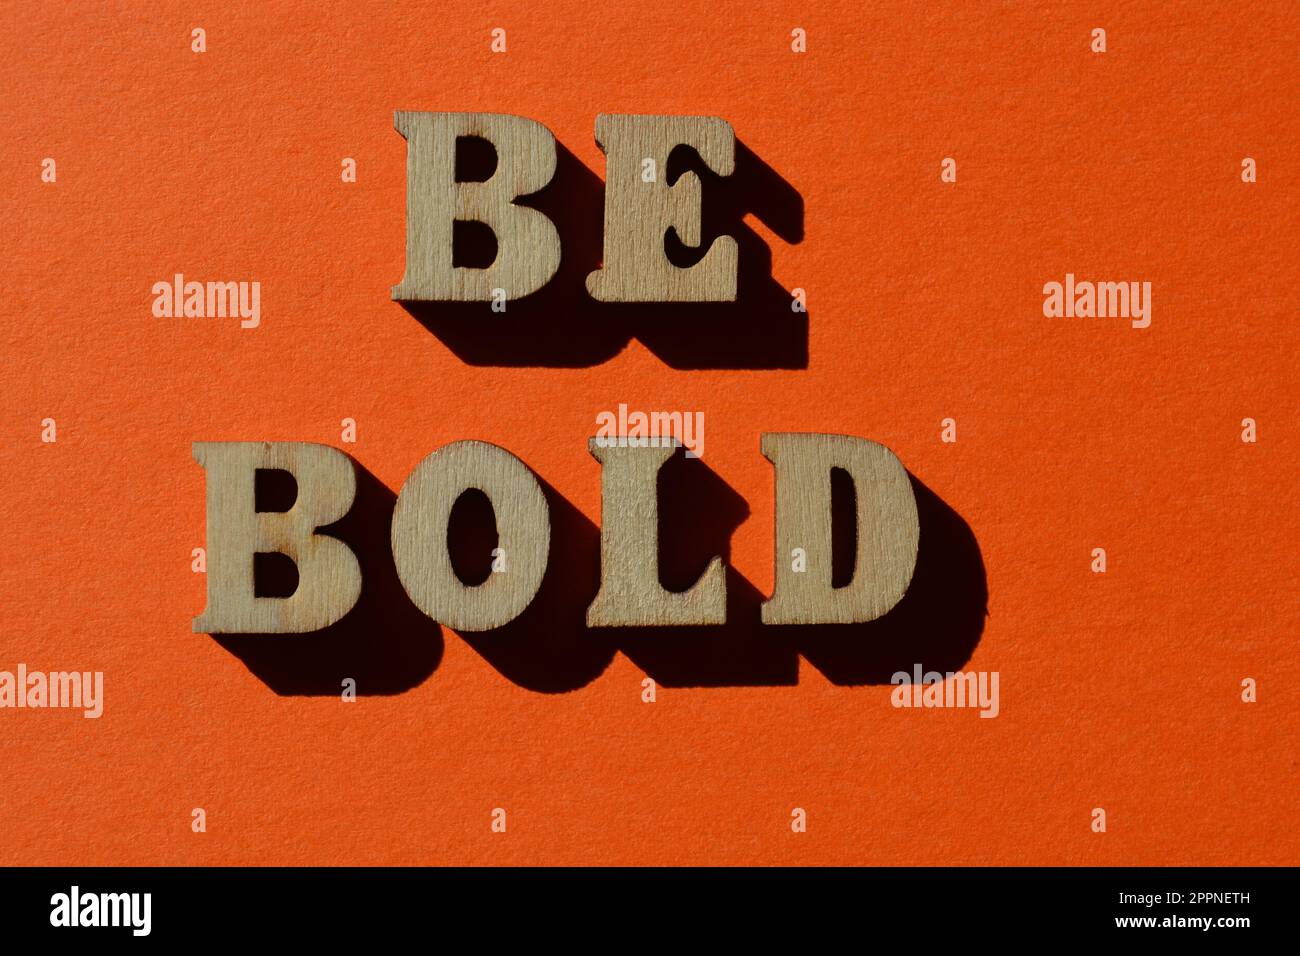 Be Bold, words in wooden alphabet letters isolated on bright orange background Stock Photo